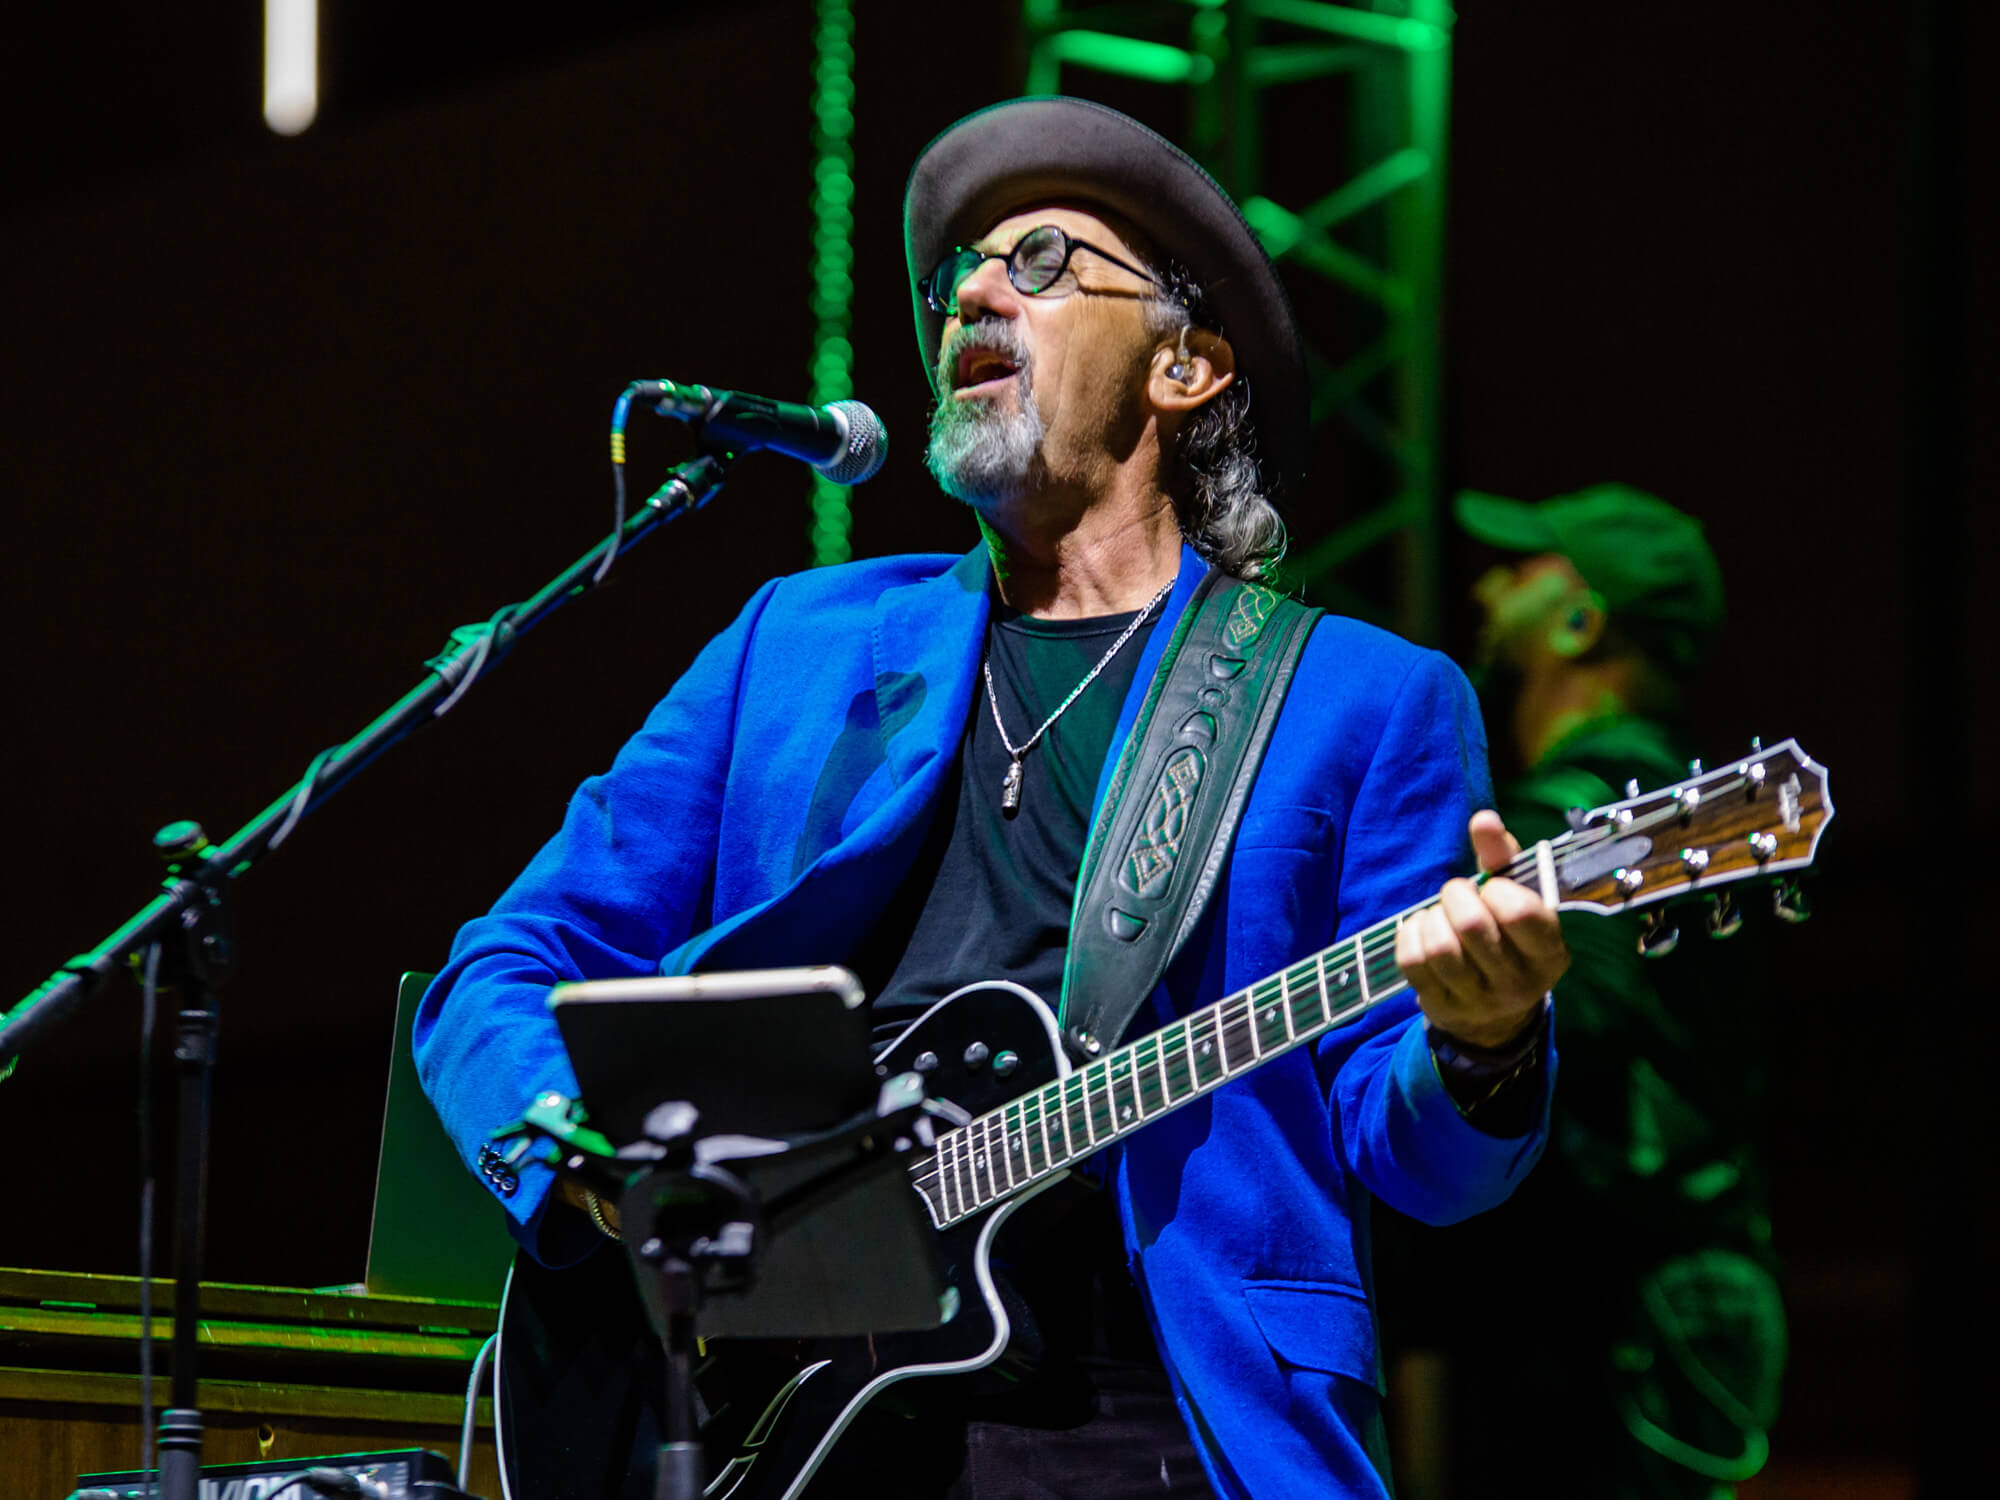 Jack Sonni on stage in 2019. He's singing and playing an acoustic guitar, and wears a bright blue blazer